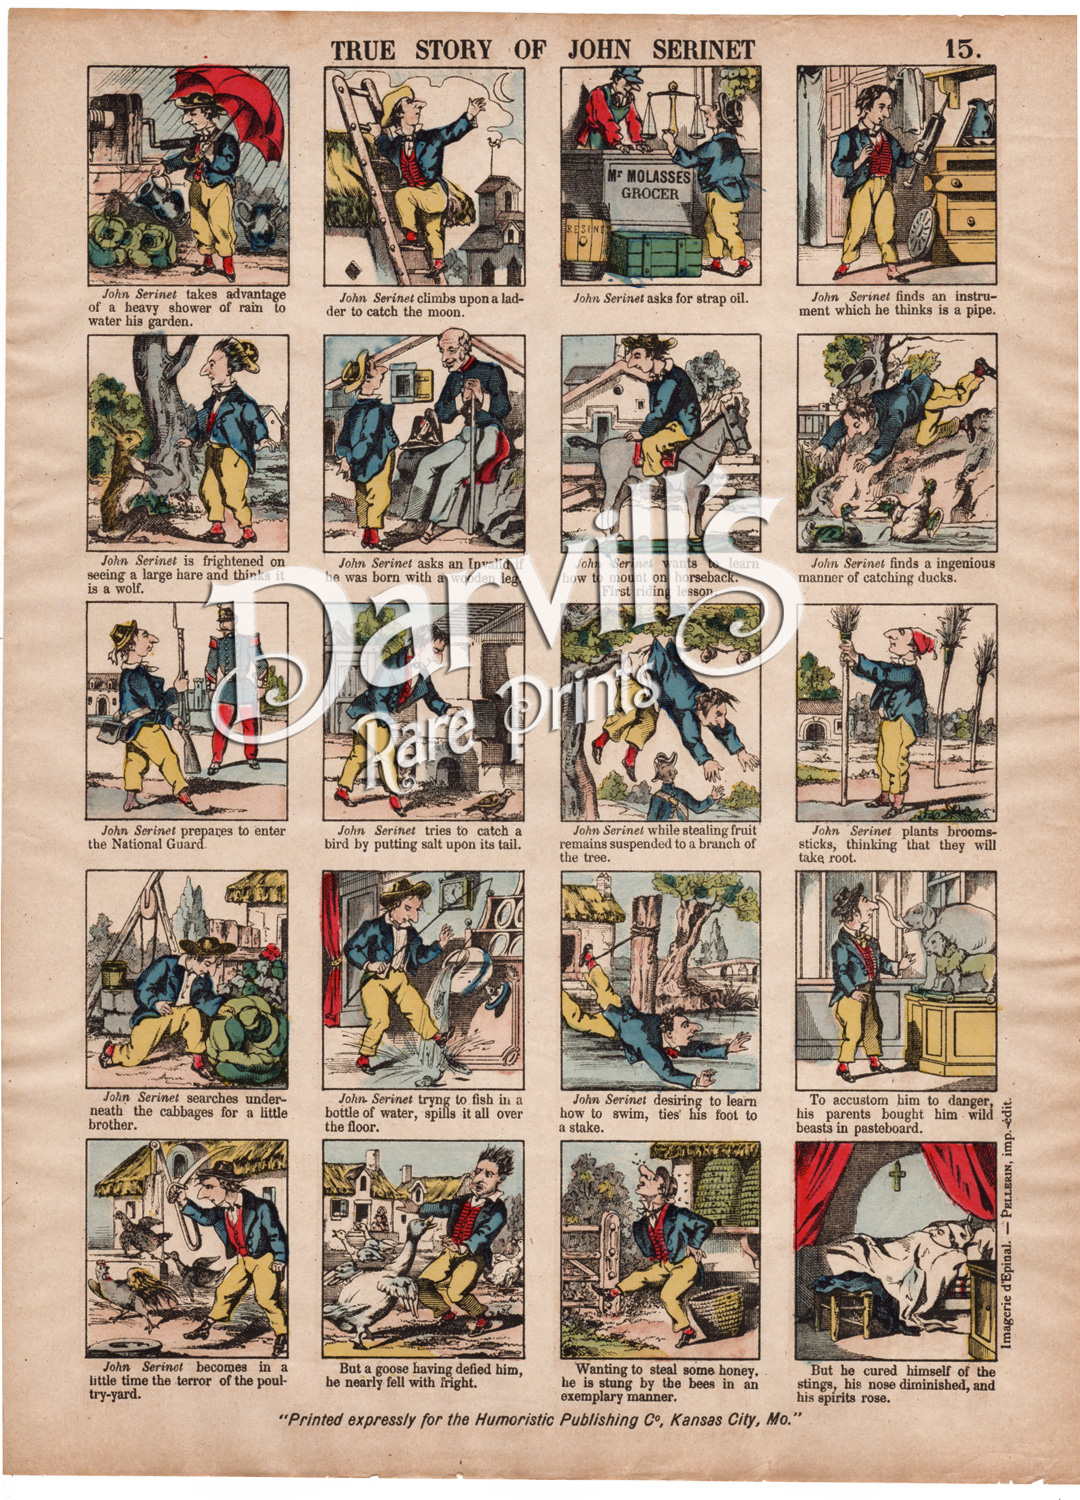 1888 Very Early COMIC STRIP Hand-Colored IMAGERIE d'EPINAL MR. HEEDLESS #  21